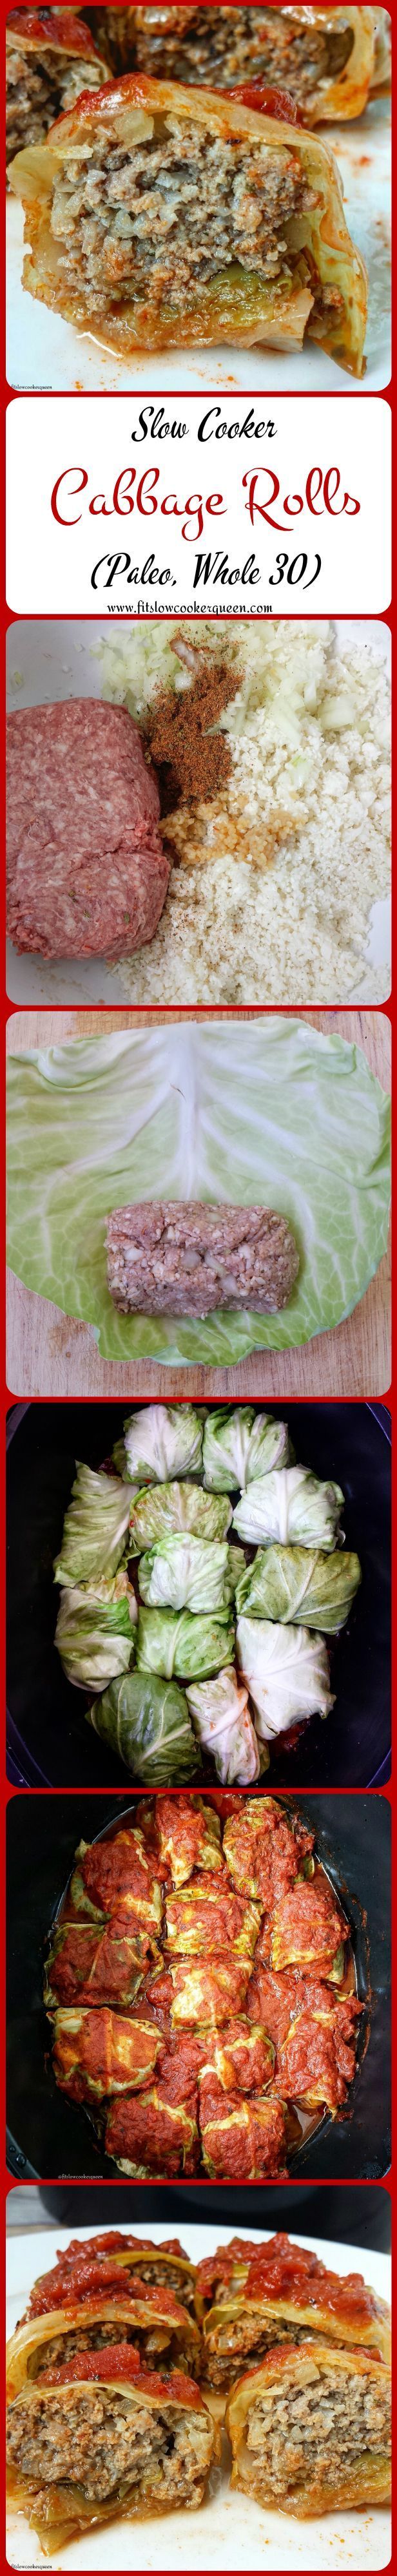 20 Slow Cooker Healthy Cabbage Roll Recipes! Many are low-carb, paleo, and whole 30 compliant slow cooker version of cabbage